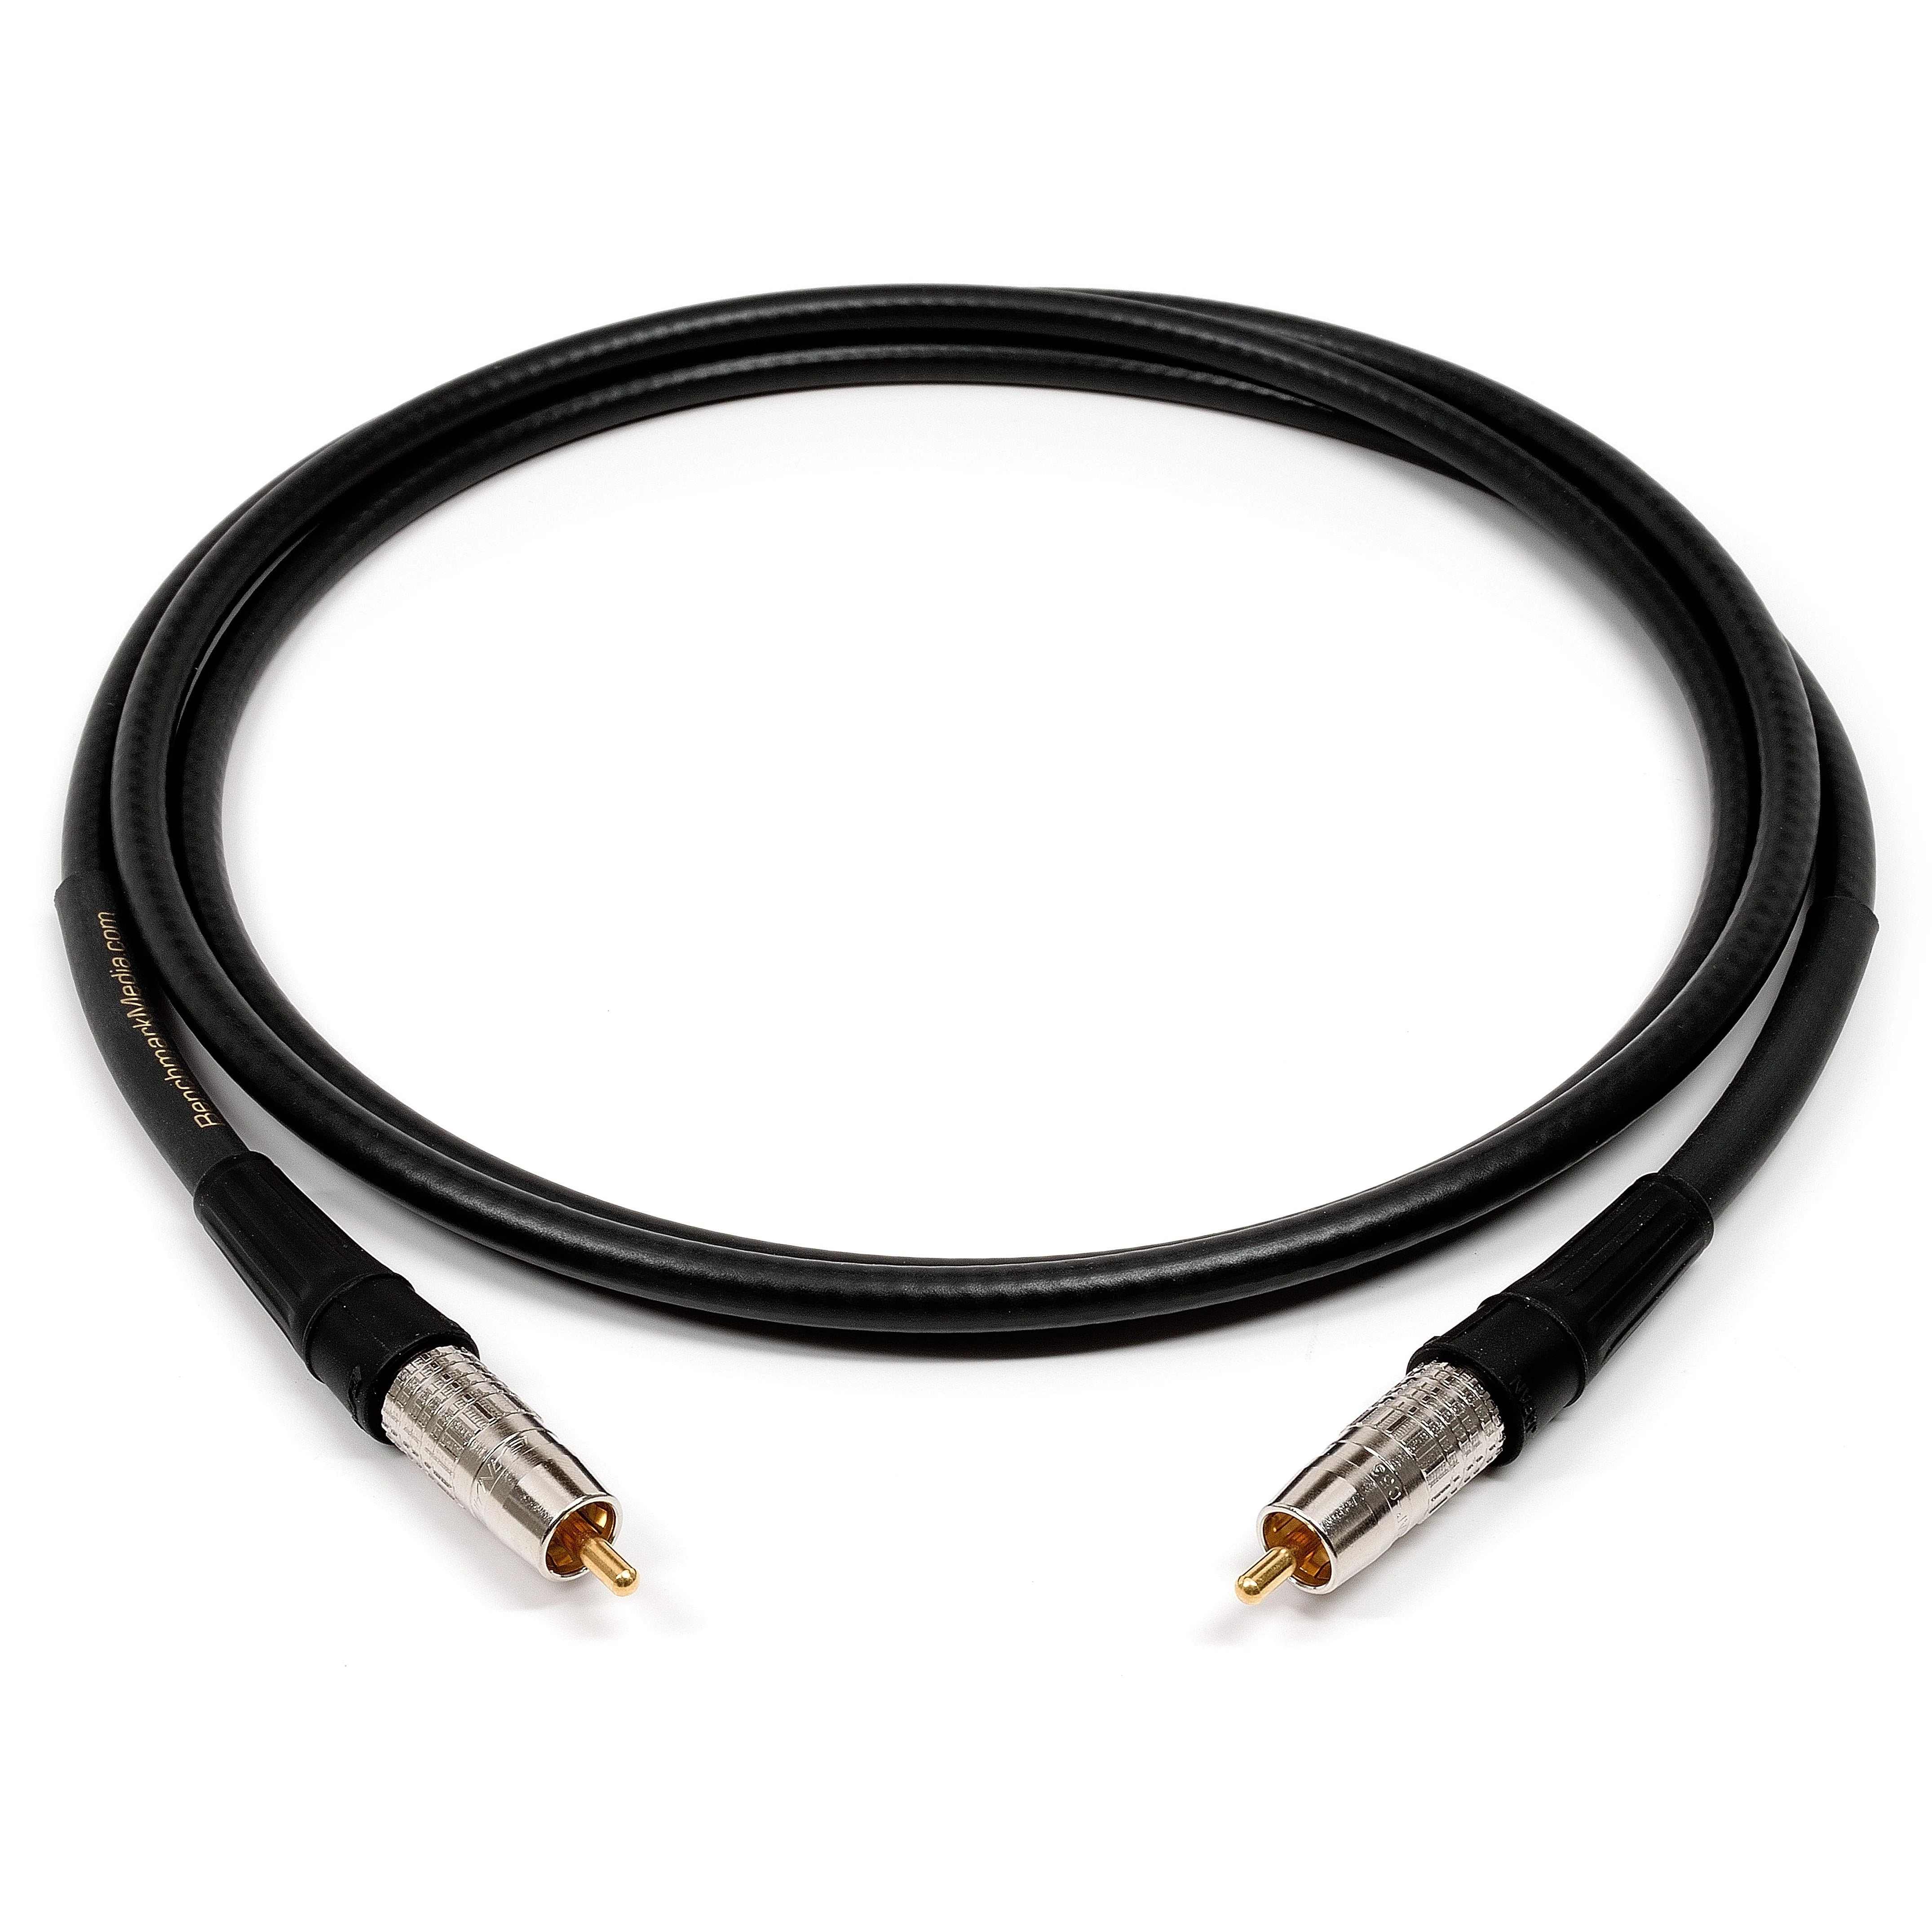 Benchmark Analog Digital RCA to RCA S/PDIF 75 Ohm Cable